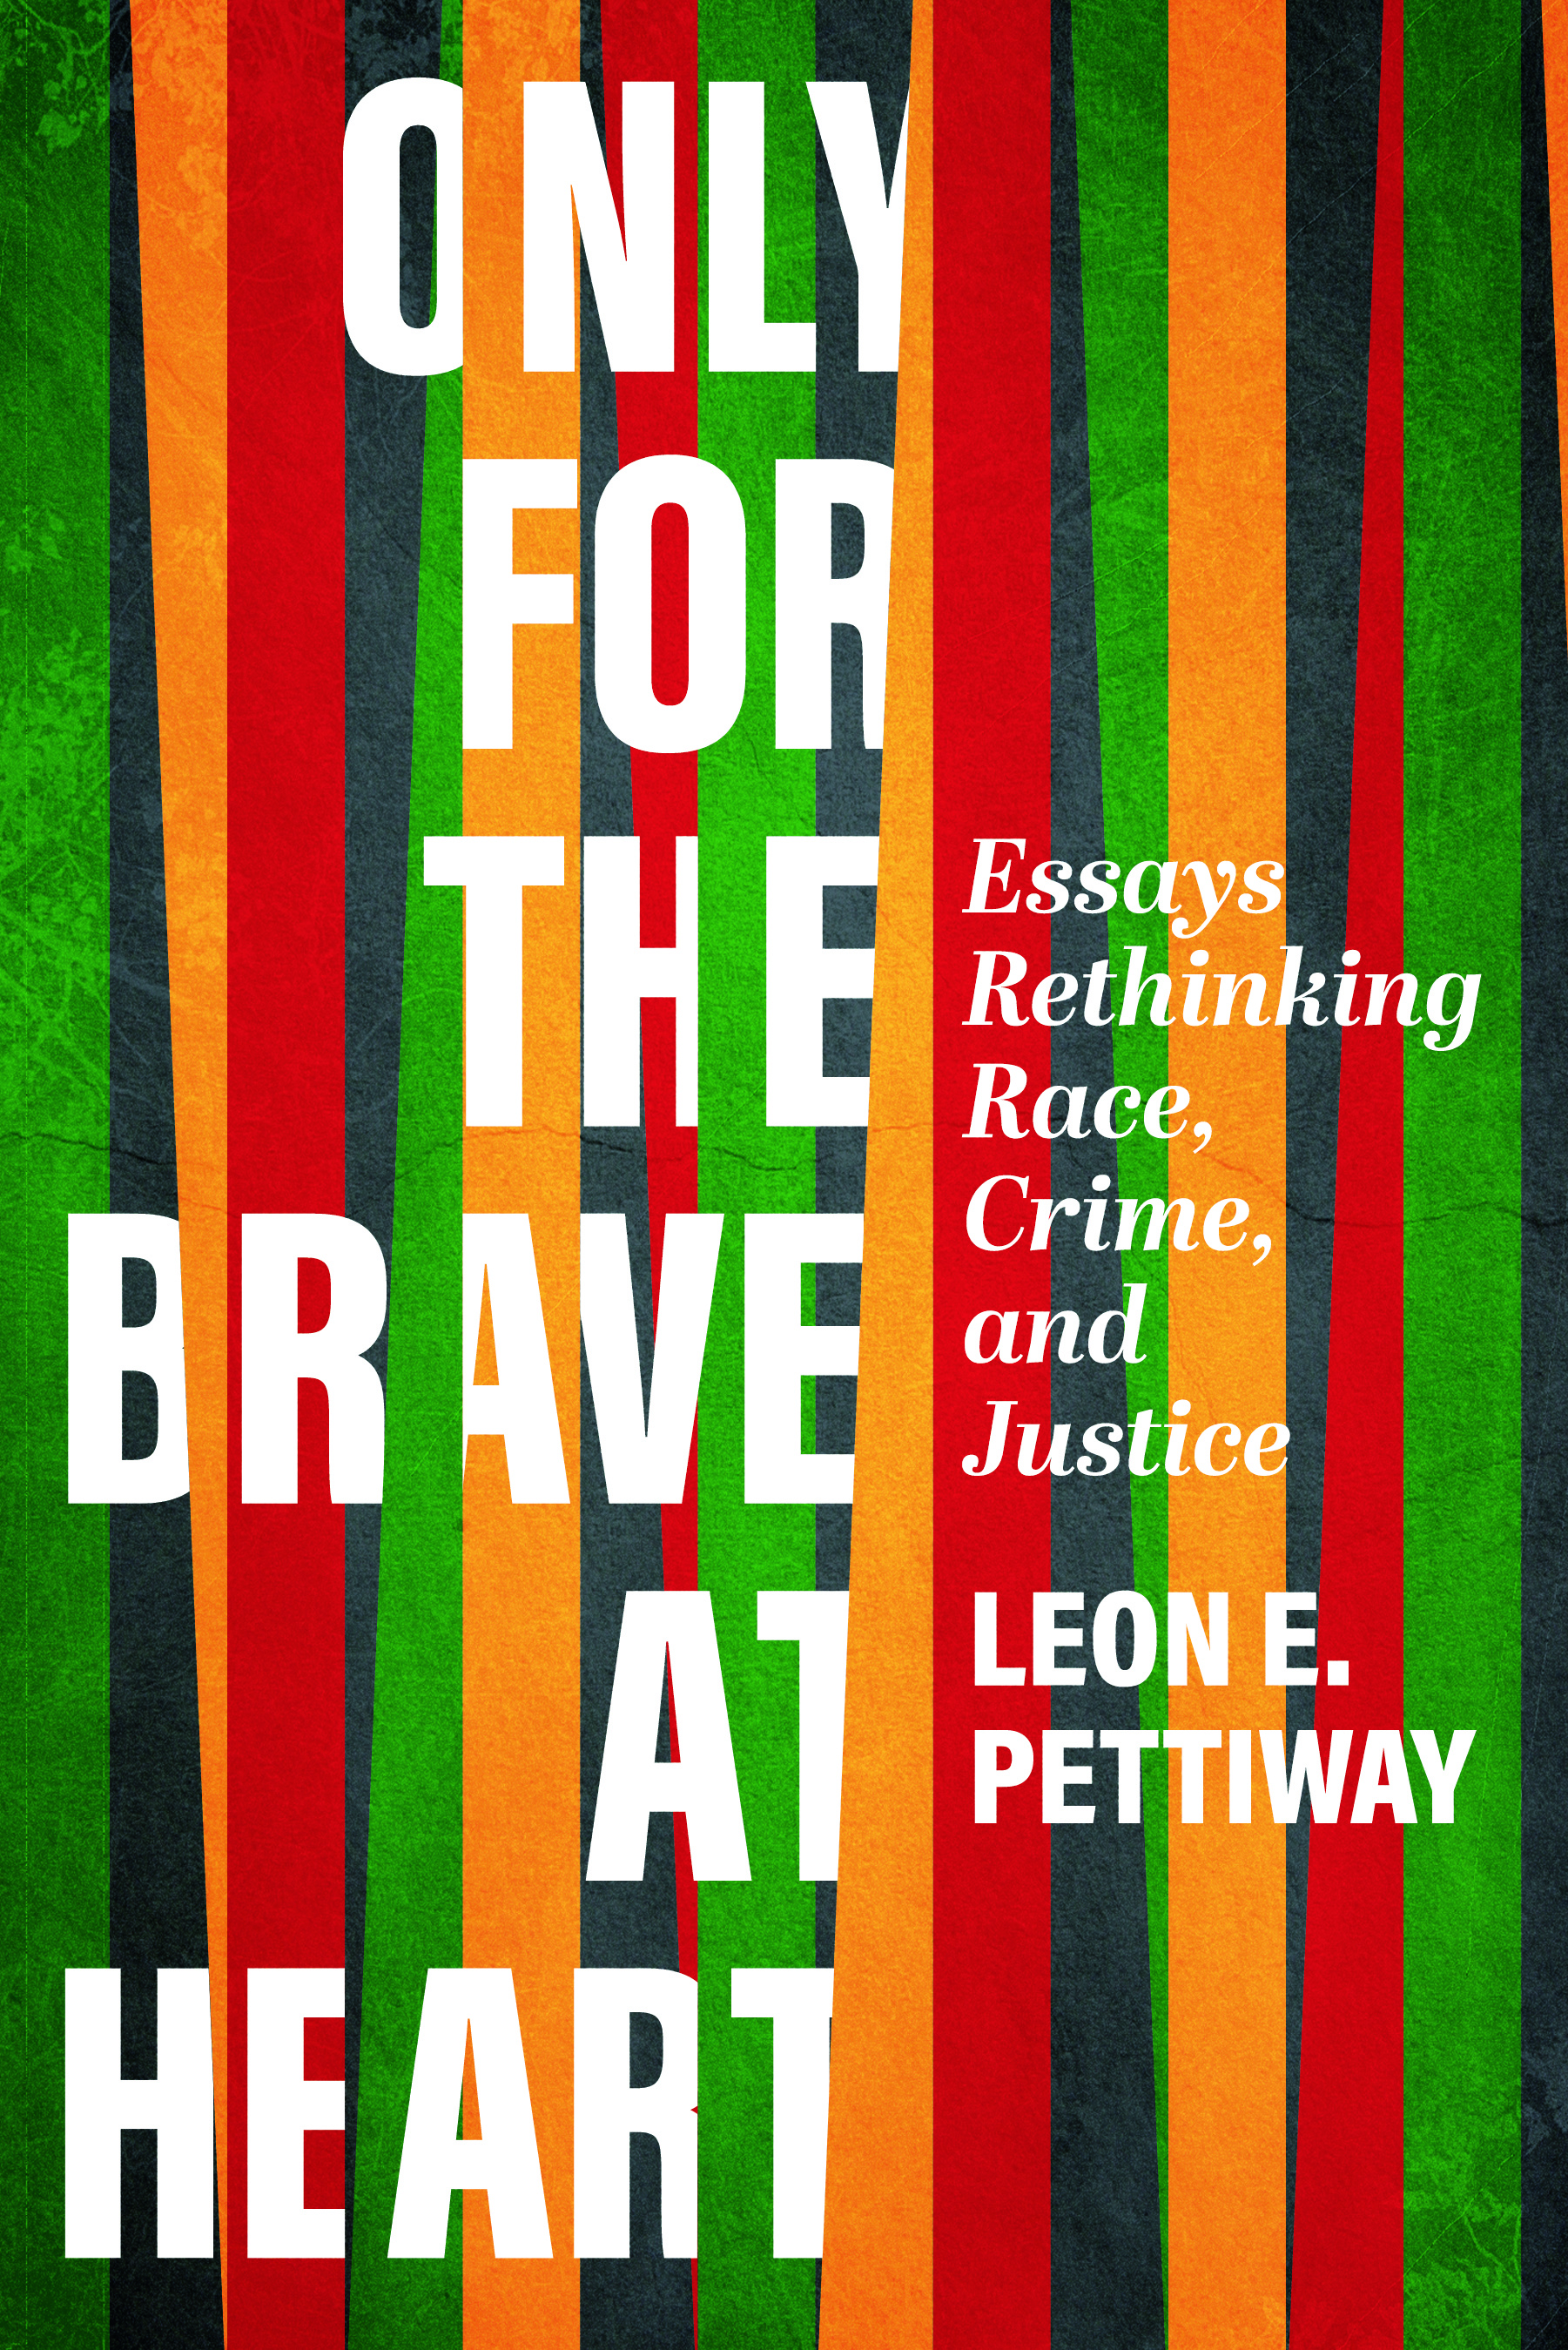 Book Cover: Only for the Brave at Heart: Essays Rethinking Race, Crime, and Justice by Leon E. Pettiwayk